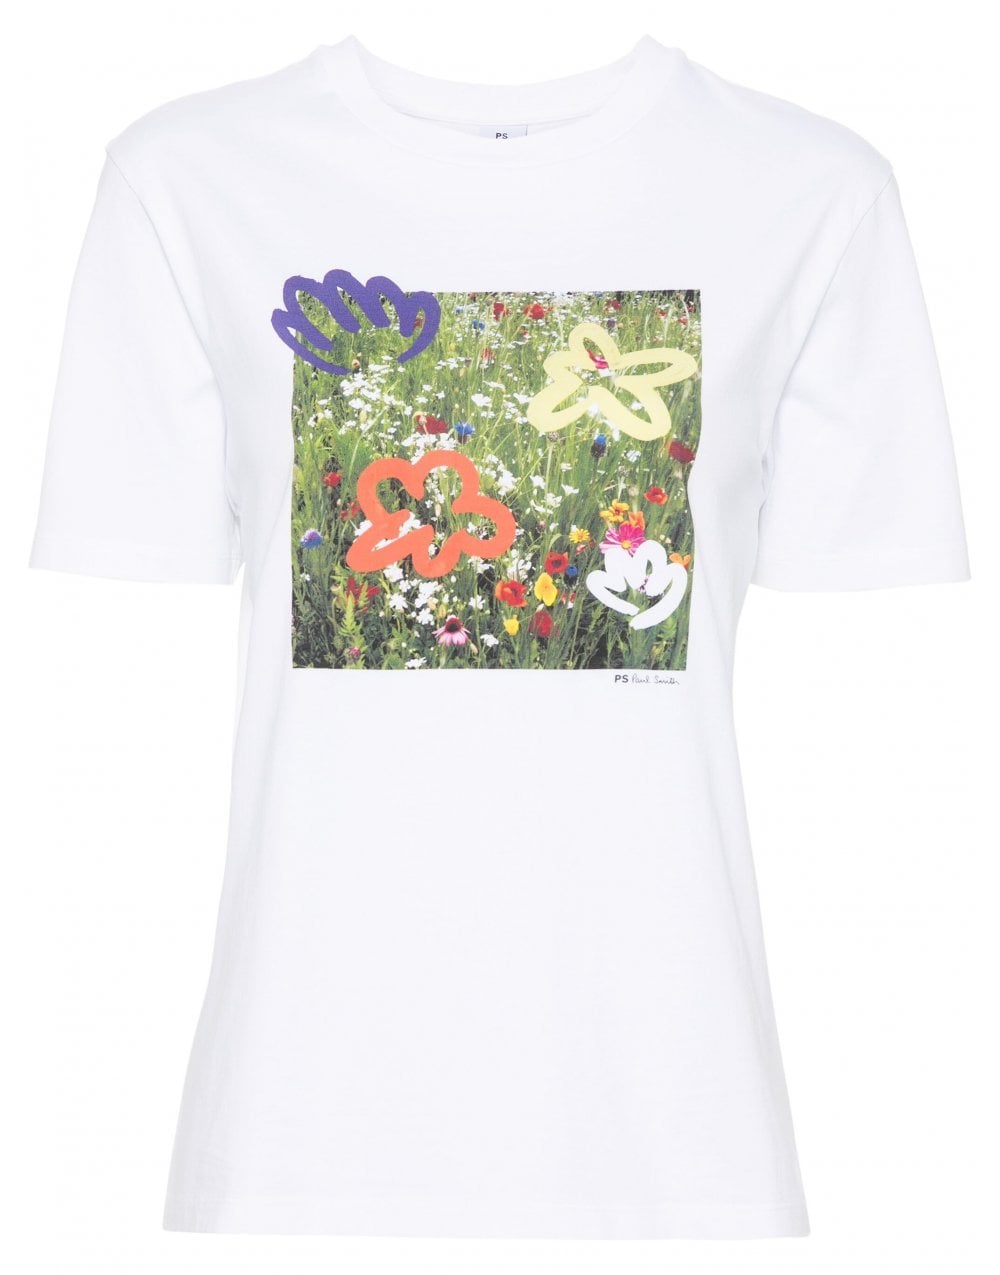 Paul Smith Paul Smith Wildflowers Cartoon Graphic T-shirt Col: 01 White, Size: L